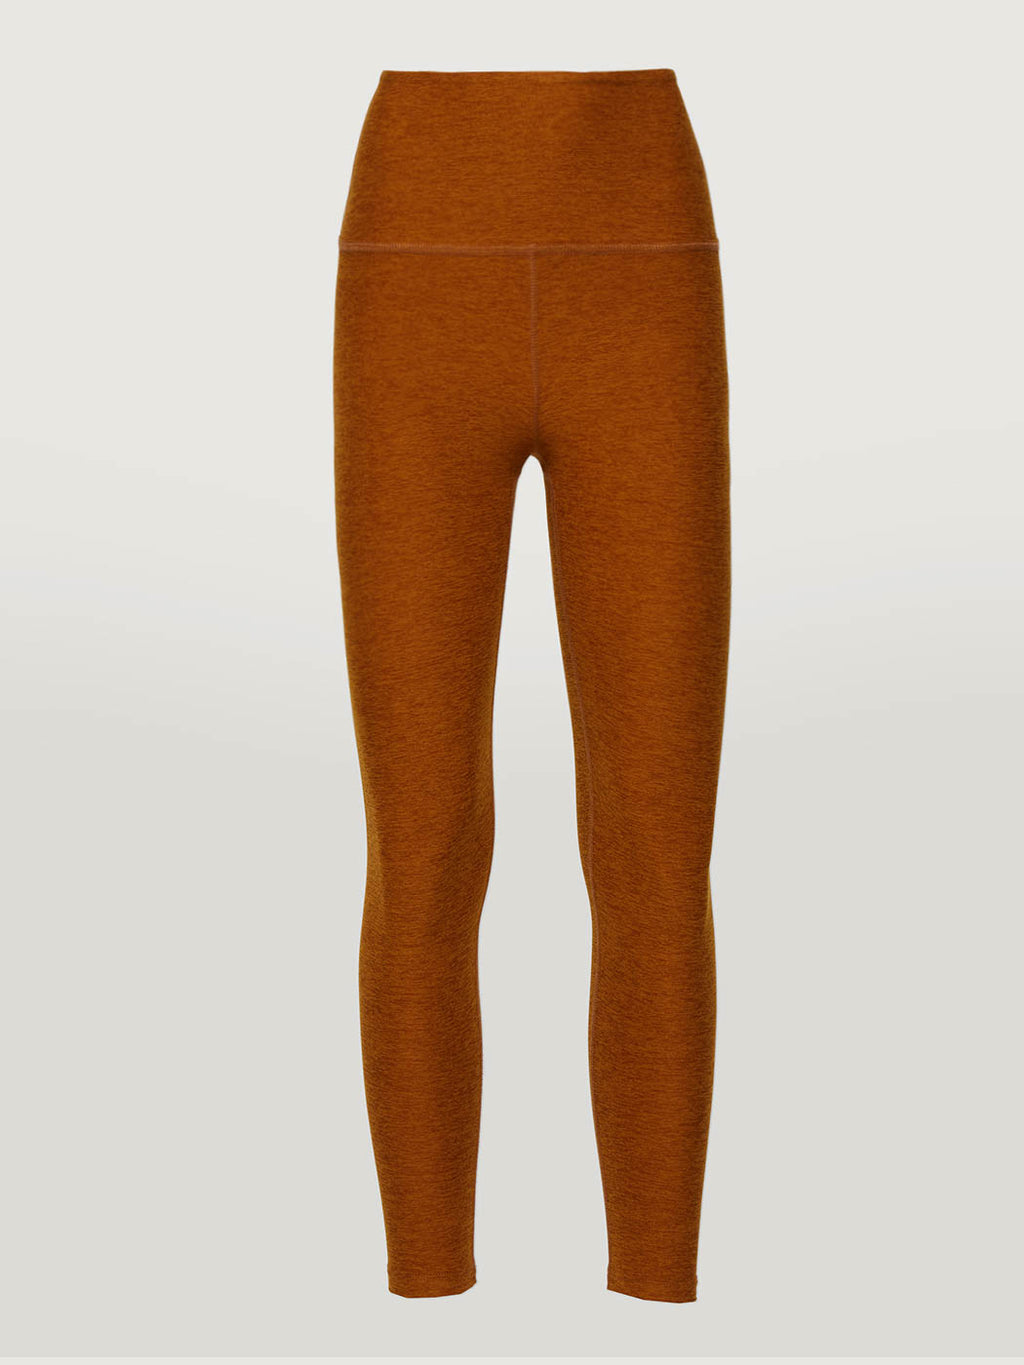 Spacedye Caught in the Midi High Waisted Legging - CLOVE BROWN HEATHER –  Carbon38